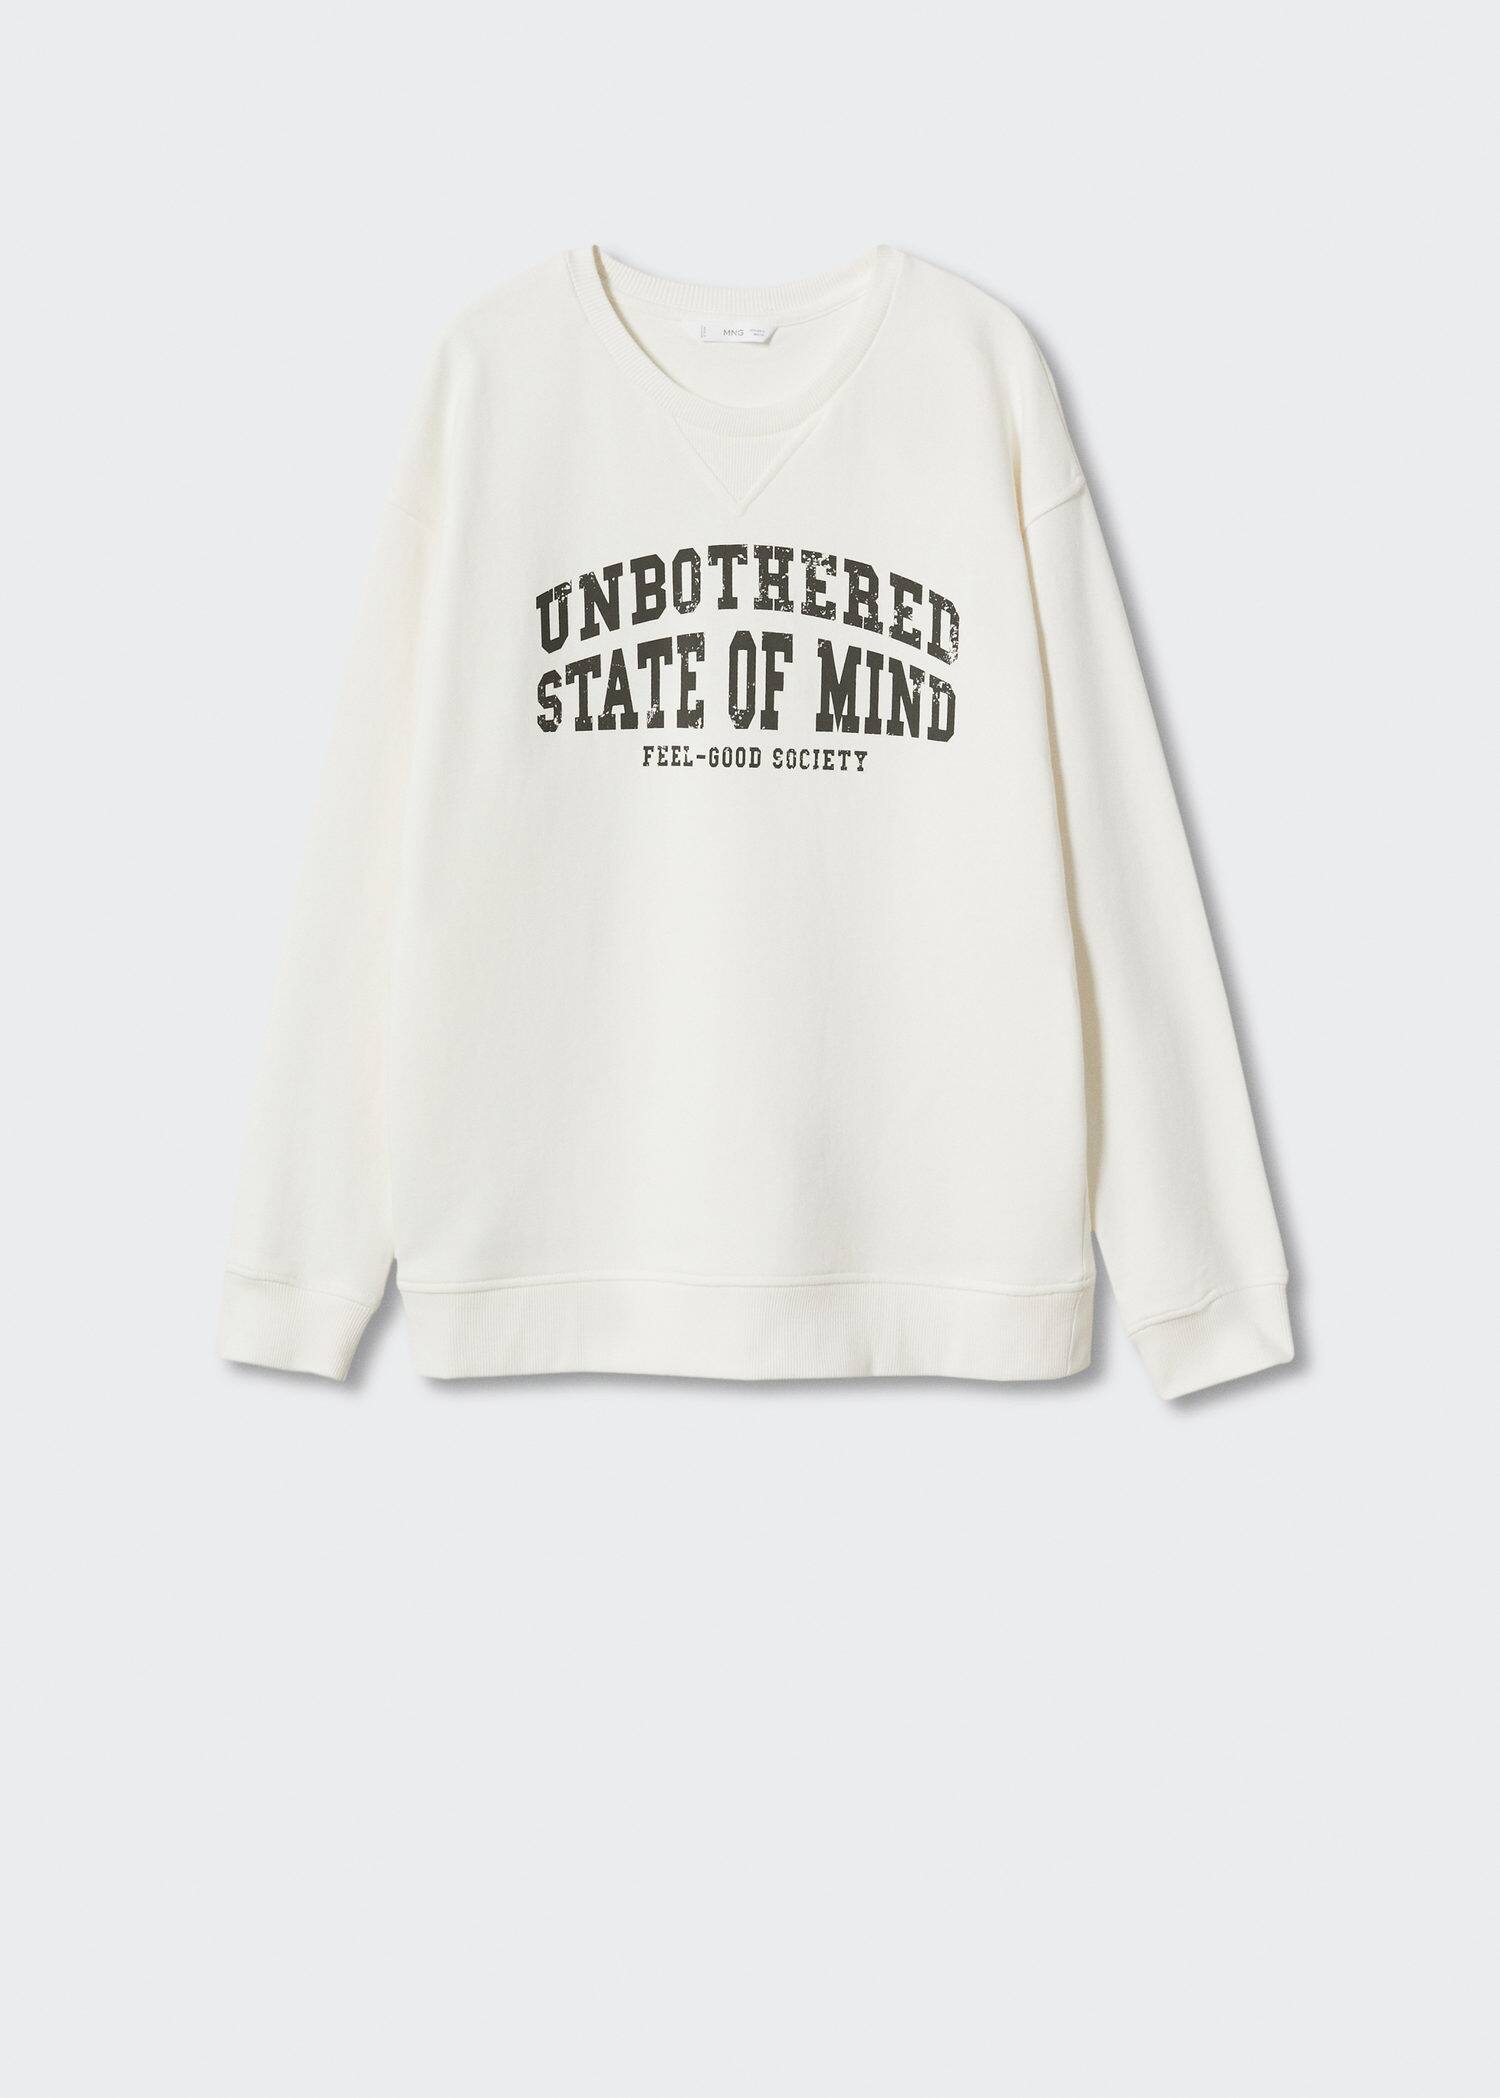 Message cotton sweatshirt - Article without model